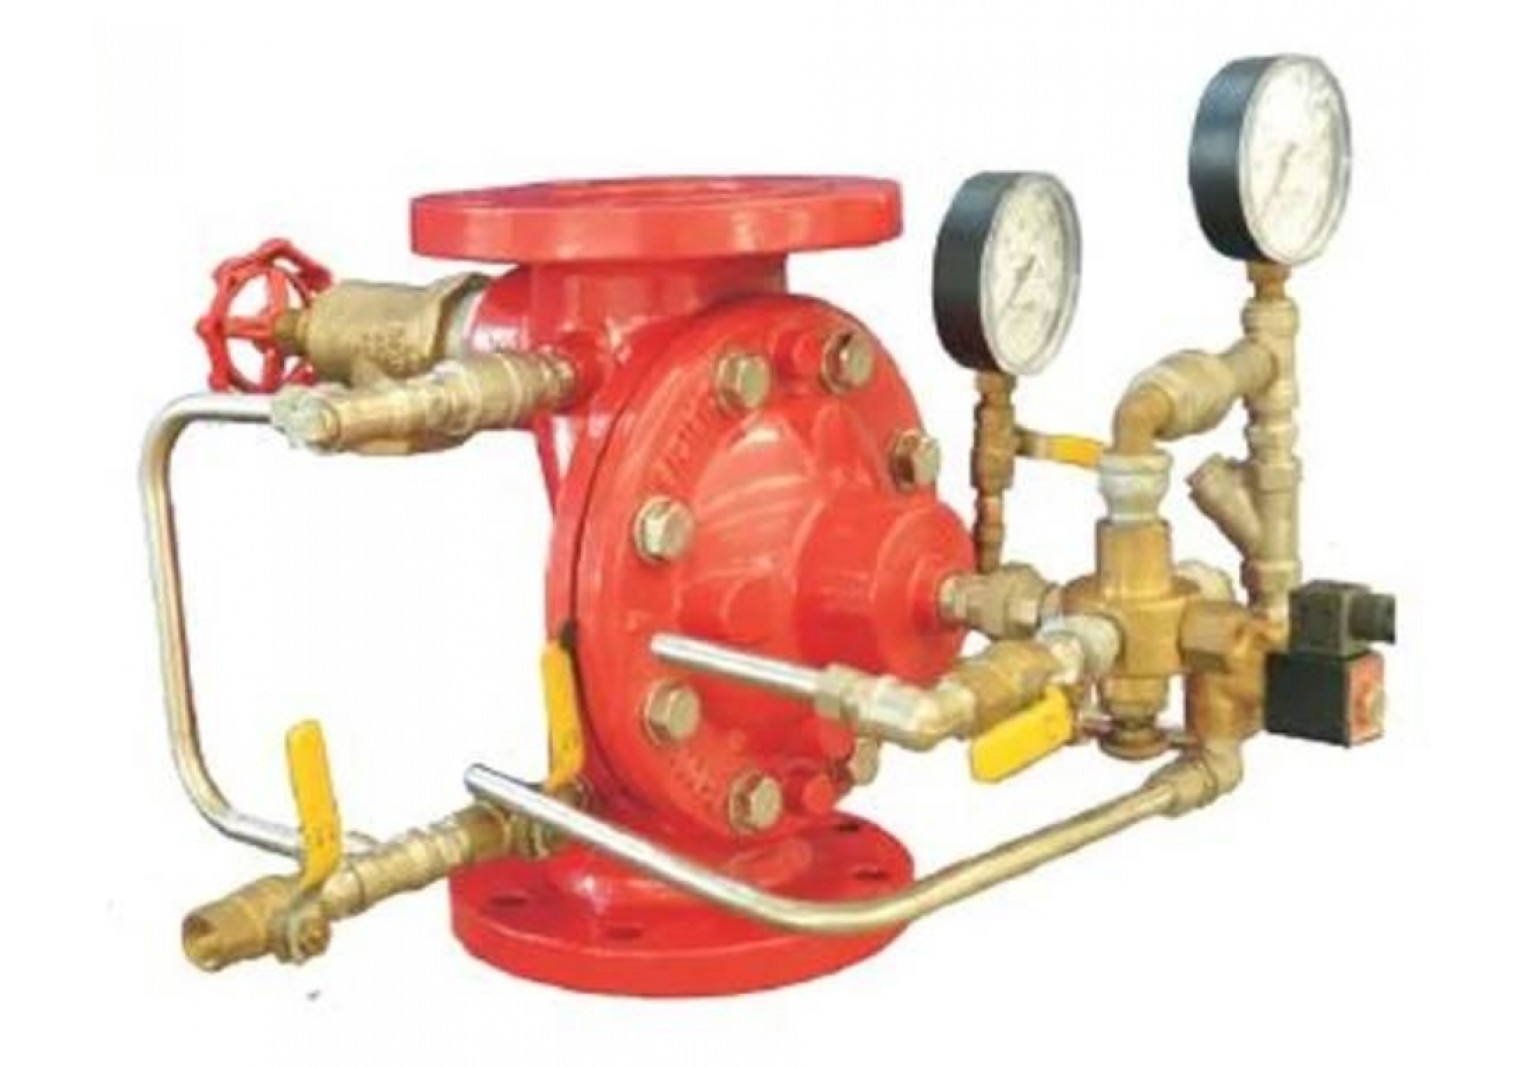 6inch Deluge Valve For Fire Fighting